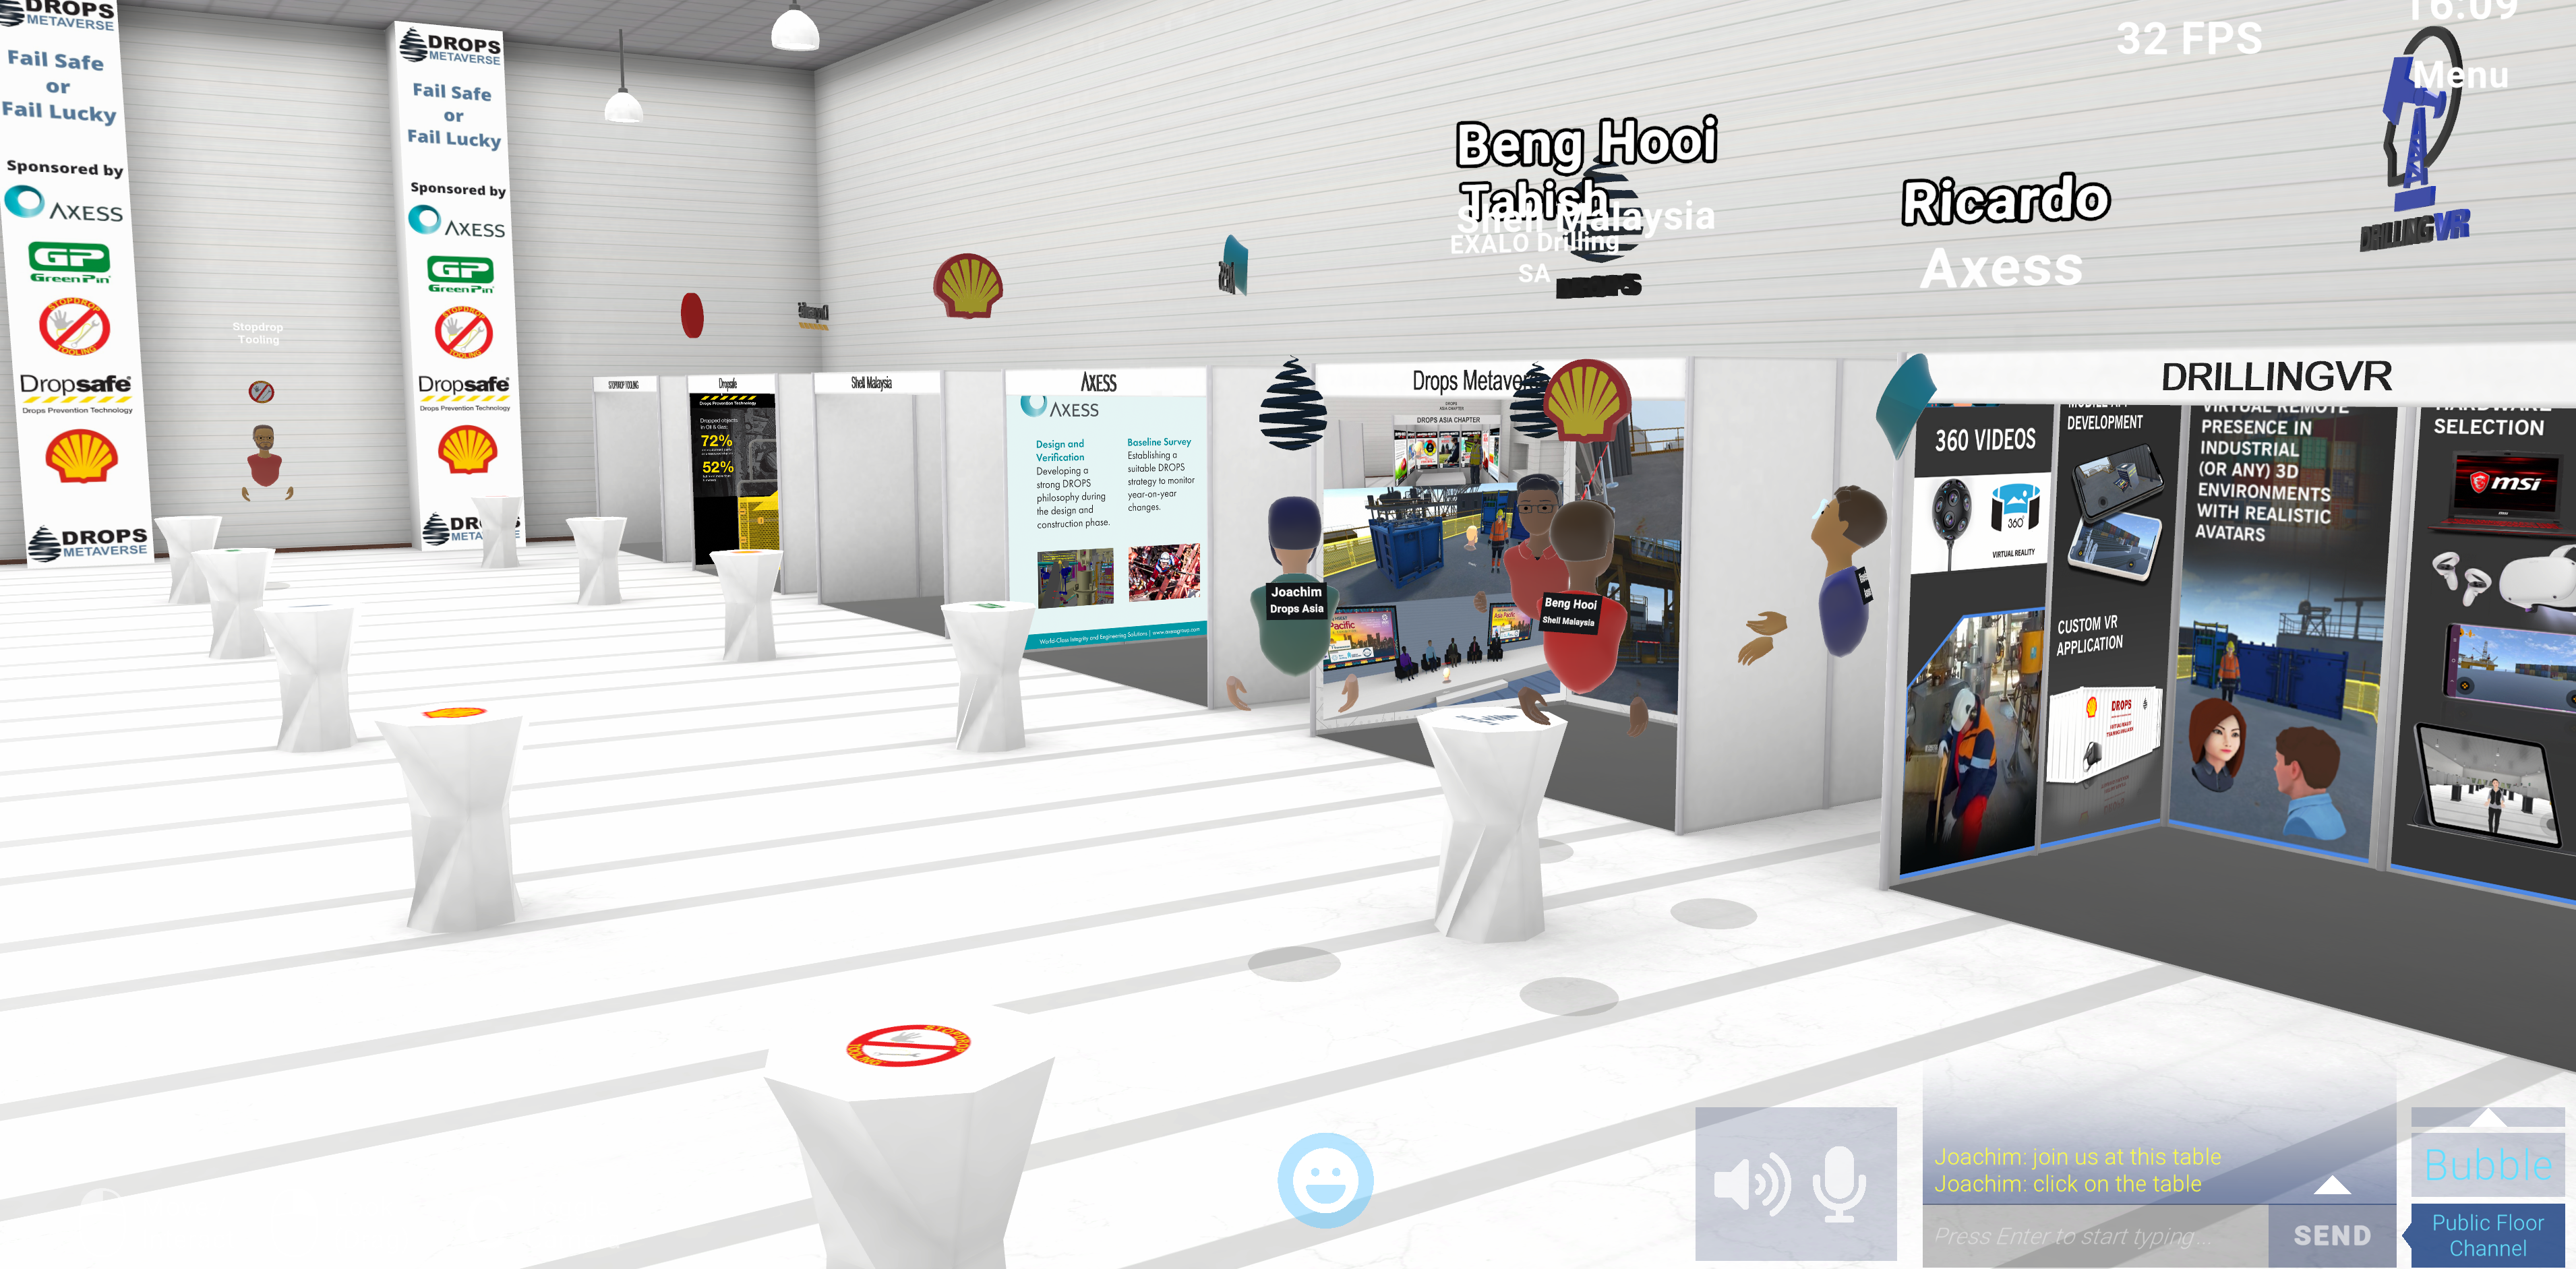 Networking Reception in front of Virtual Exhibition